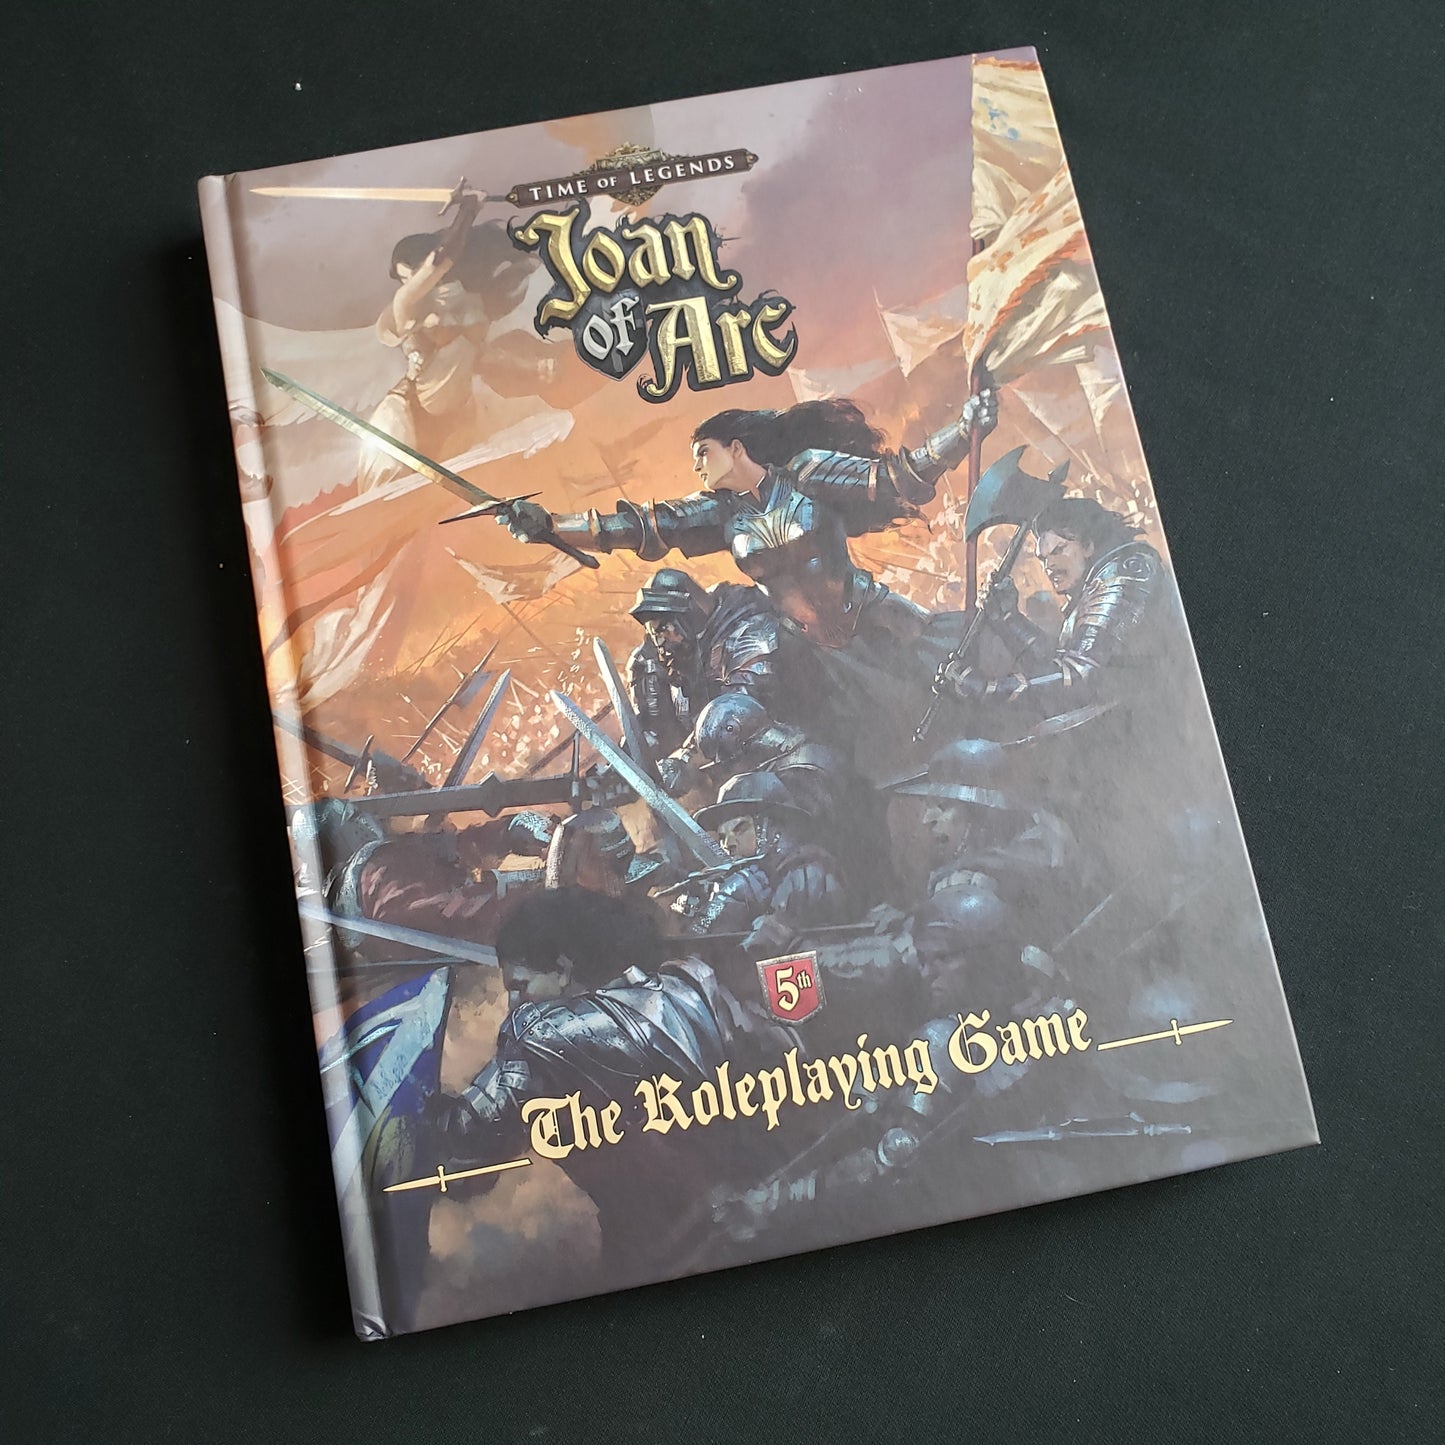 Image shows the front cover of the core rulebook for the Joan of Arc roleplaying game